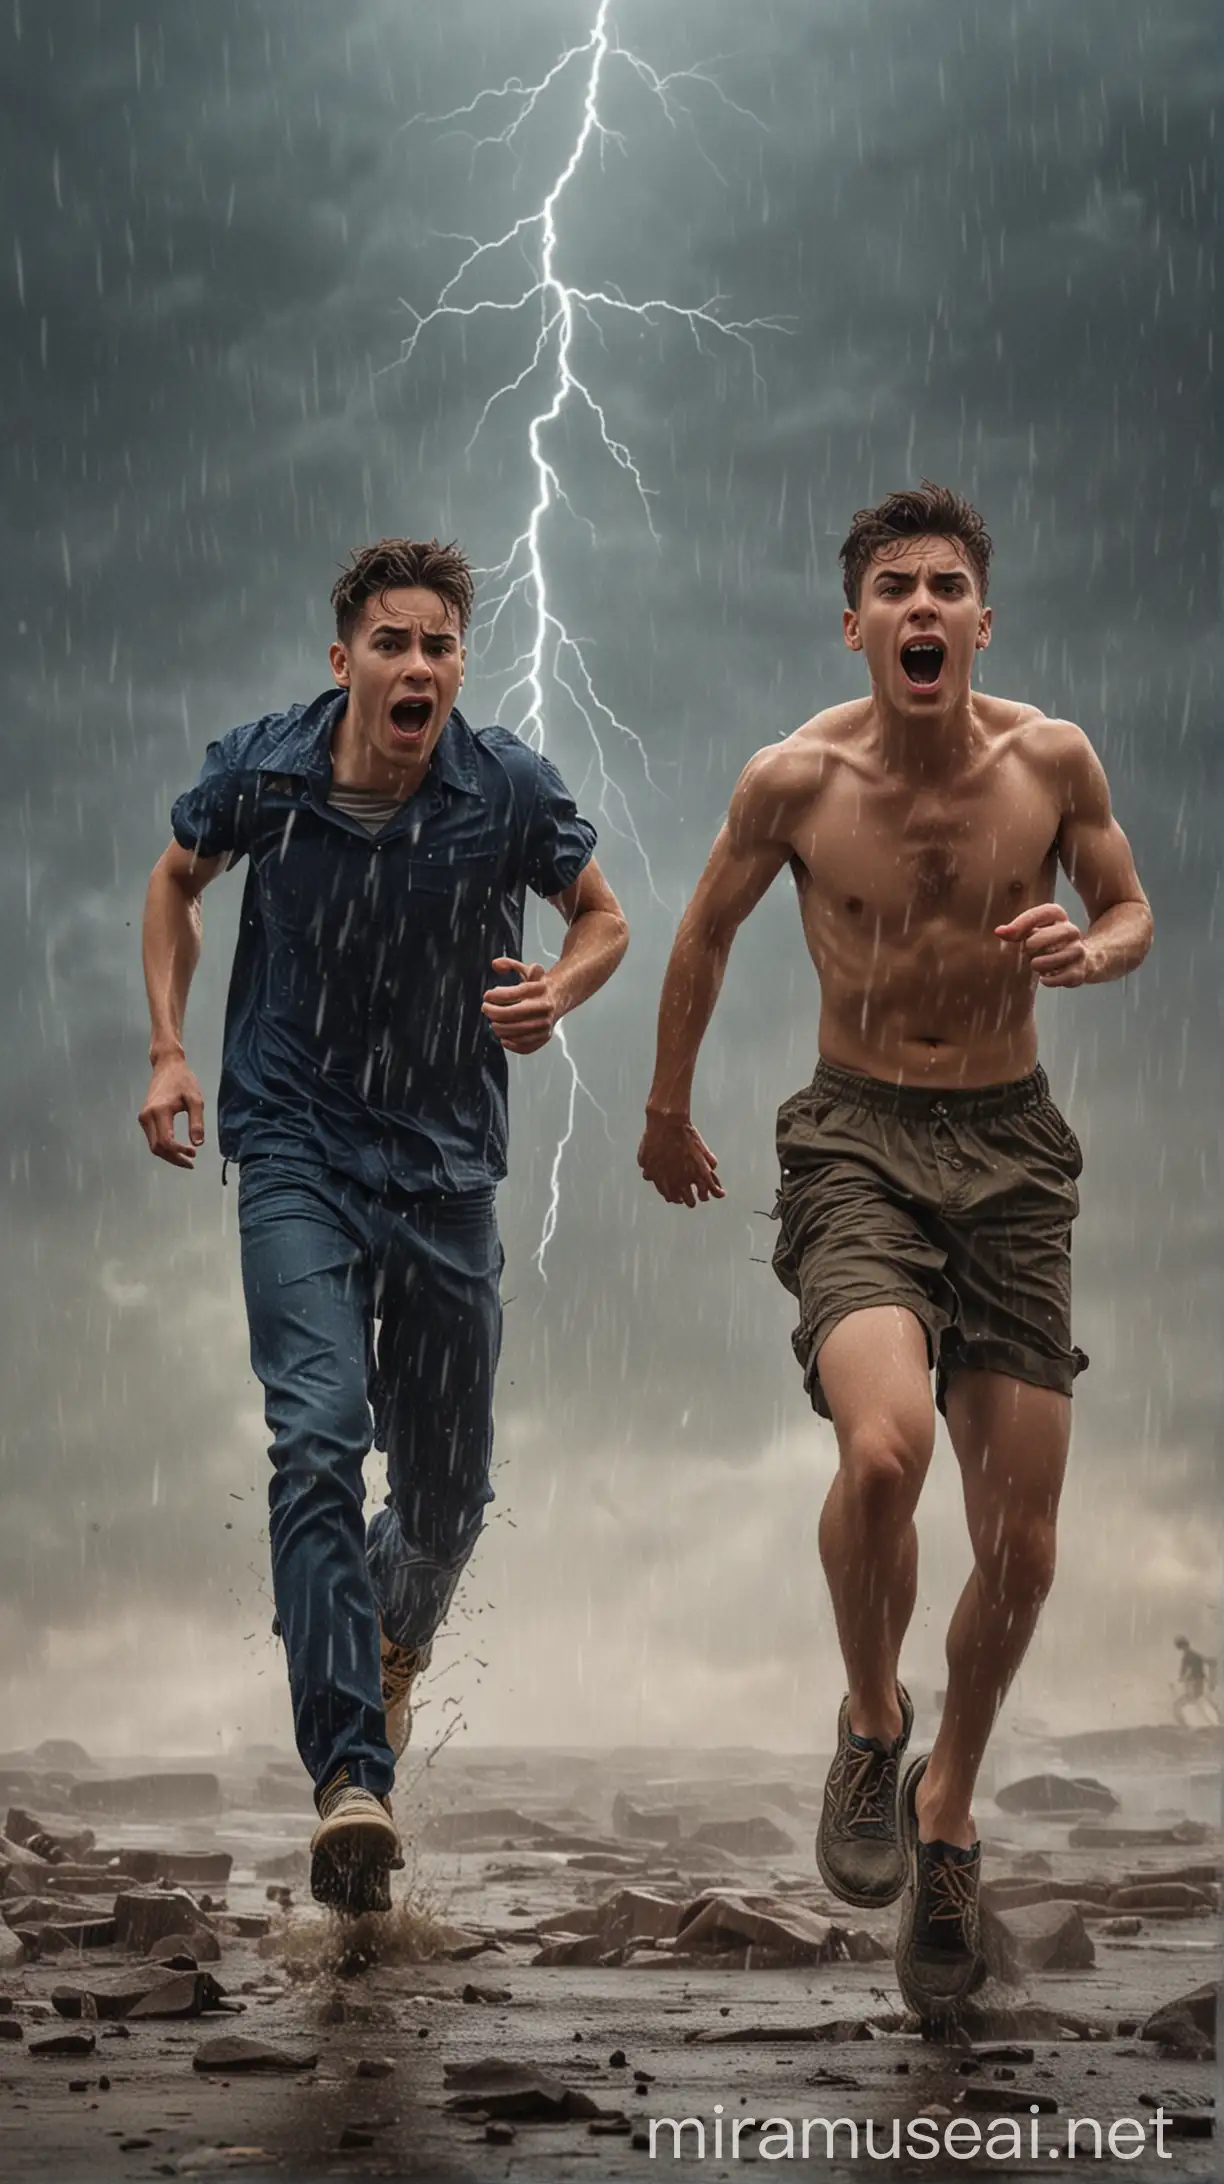 A young gay couple runs away from the storm and thunder in a panic